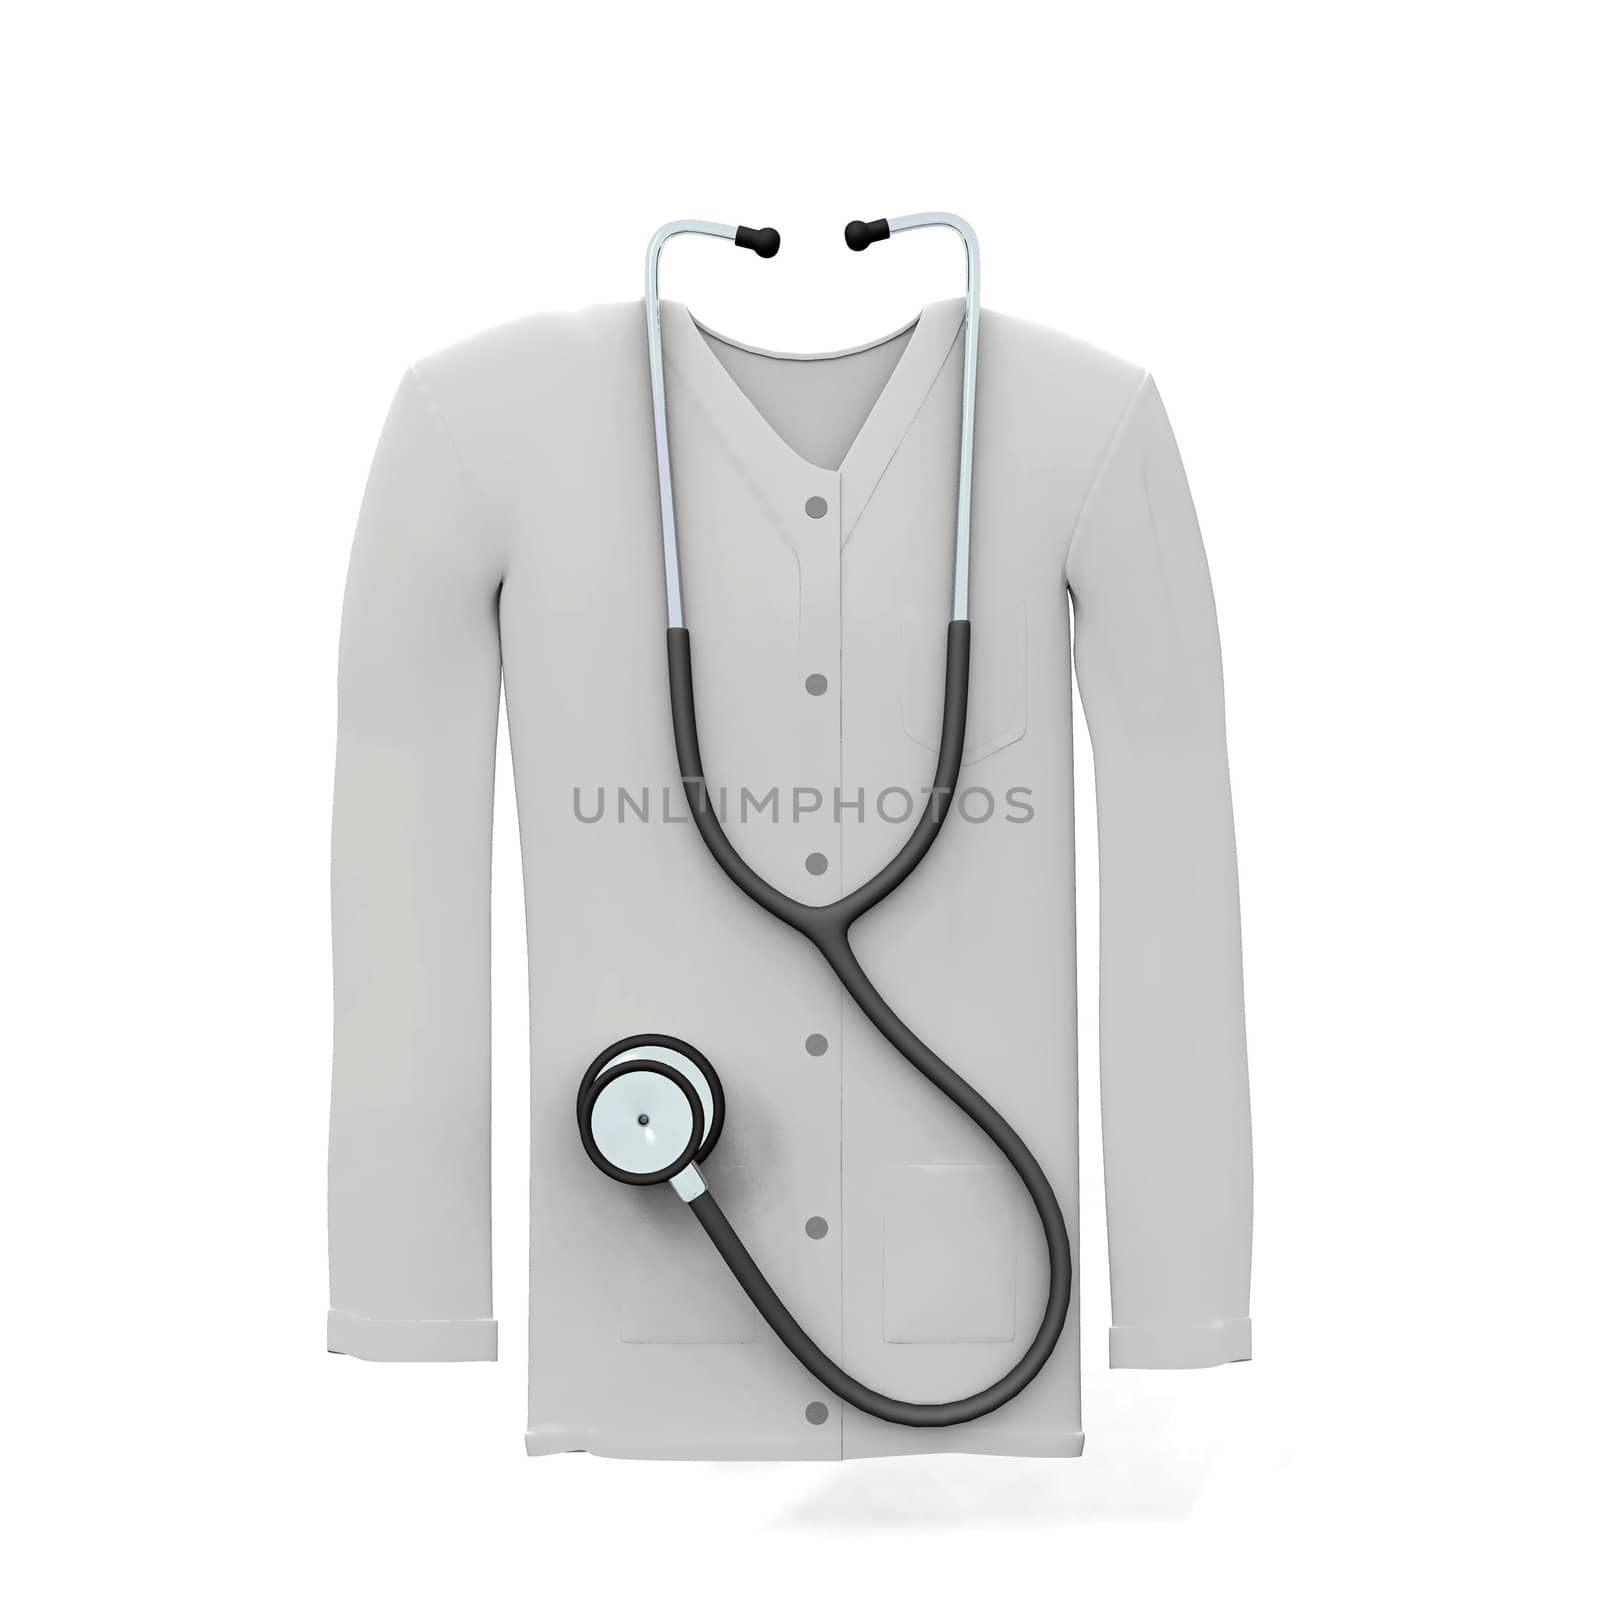 the stethoscope and the cardigan